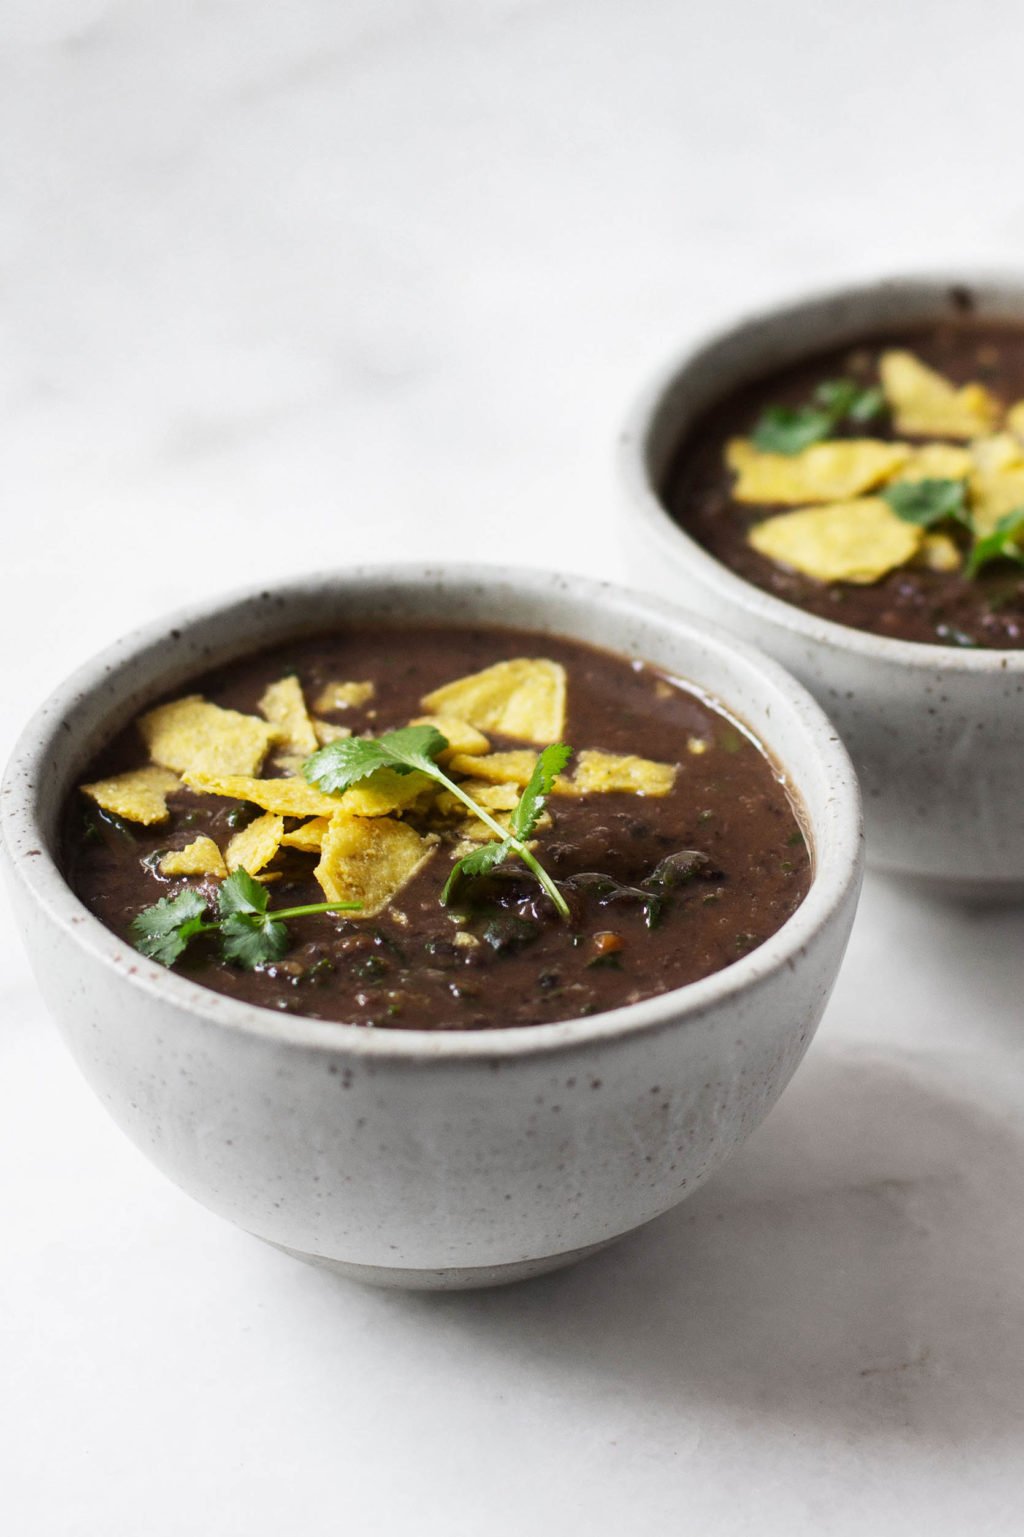 A zoomed in photograph of a vegan black bean soup, prepared with kale and garnished with herbs and corn chips.